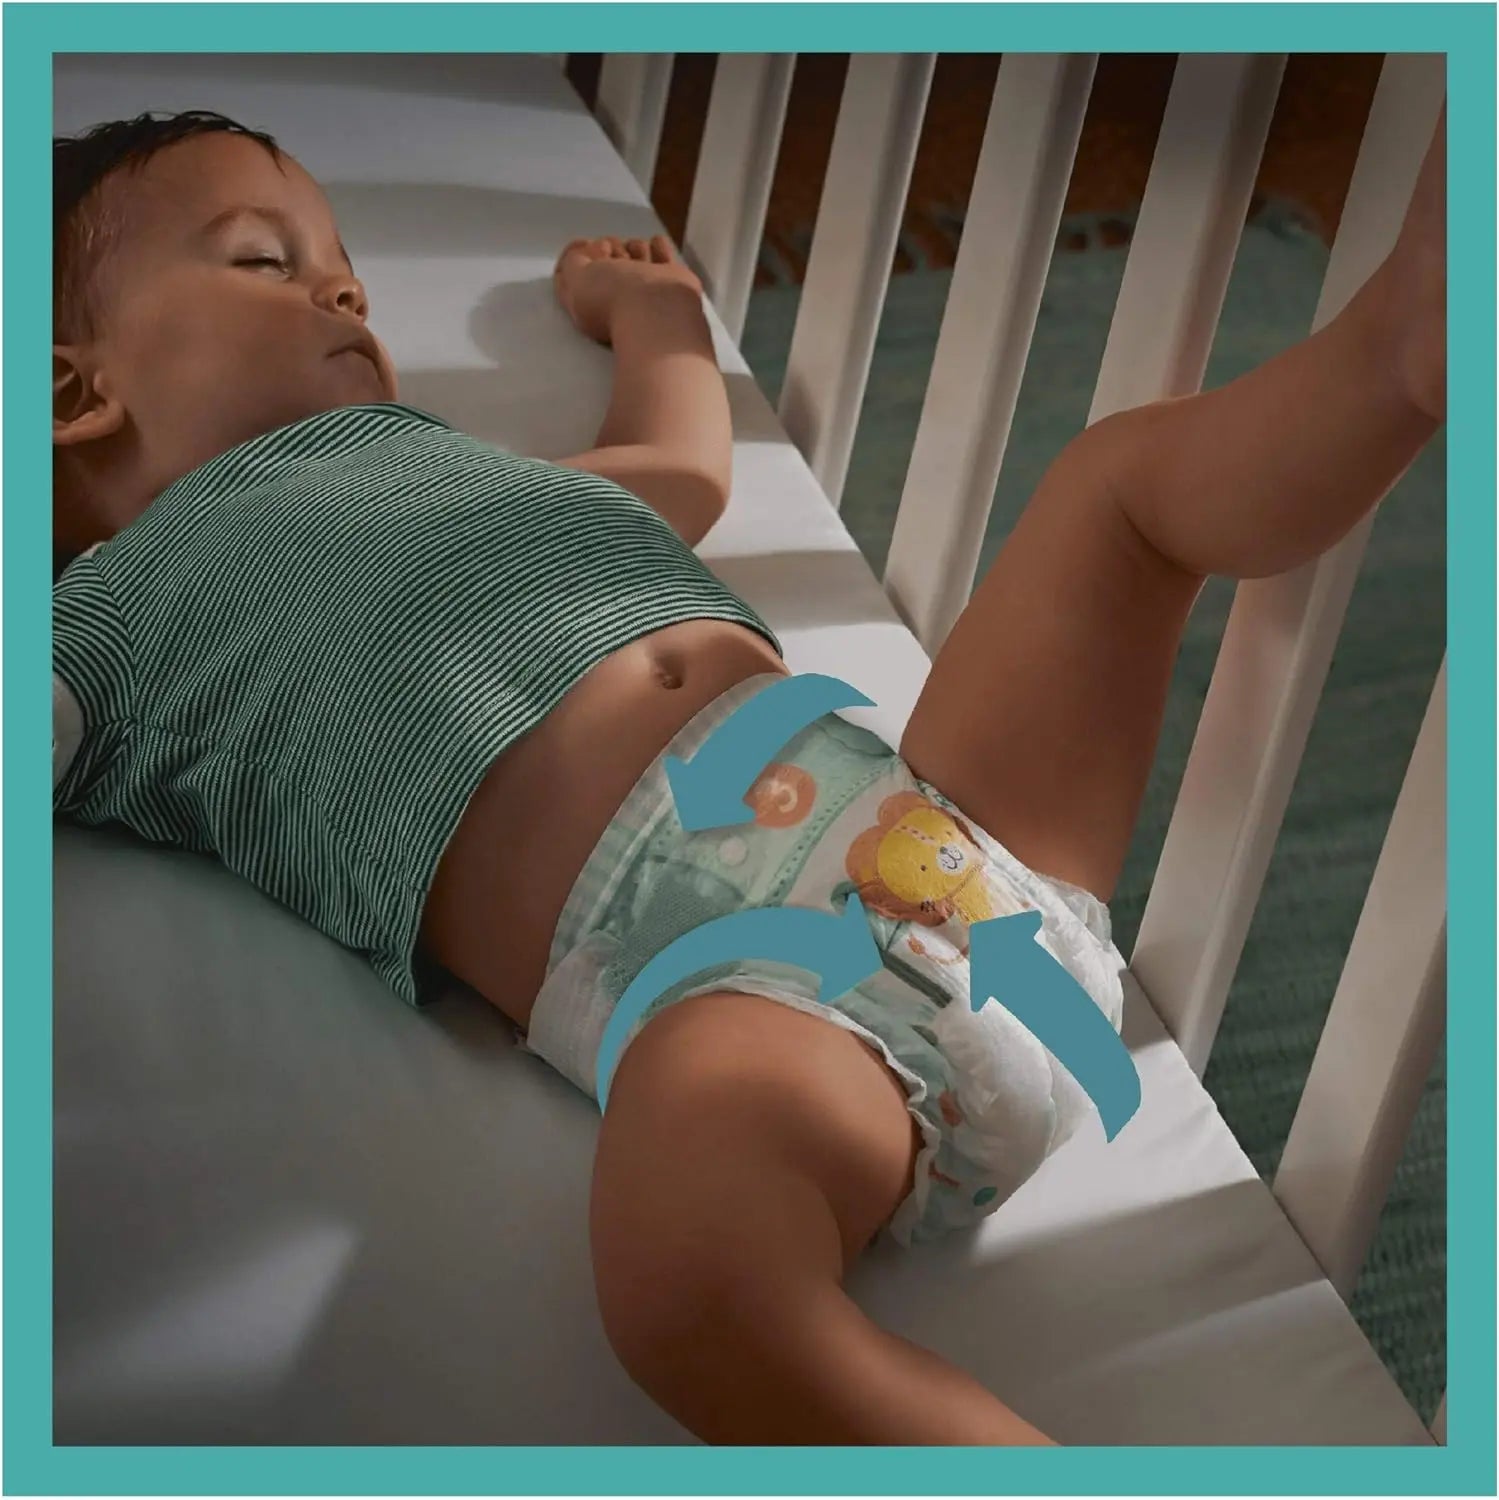 Couches Pampers Baby-Dry Taille - TECIN HOLDING – TECIN HOLDING